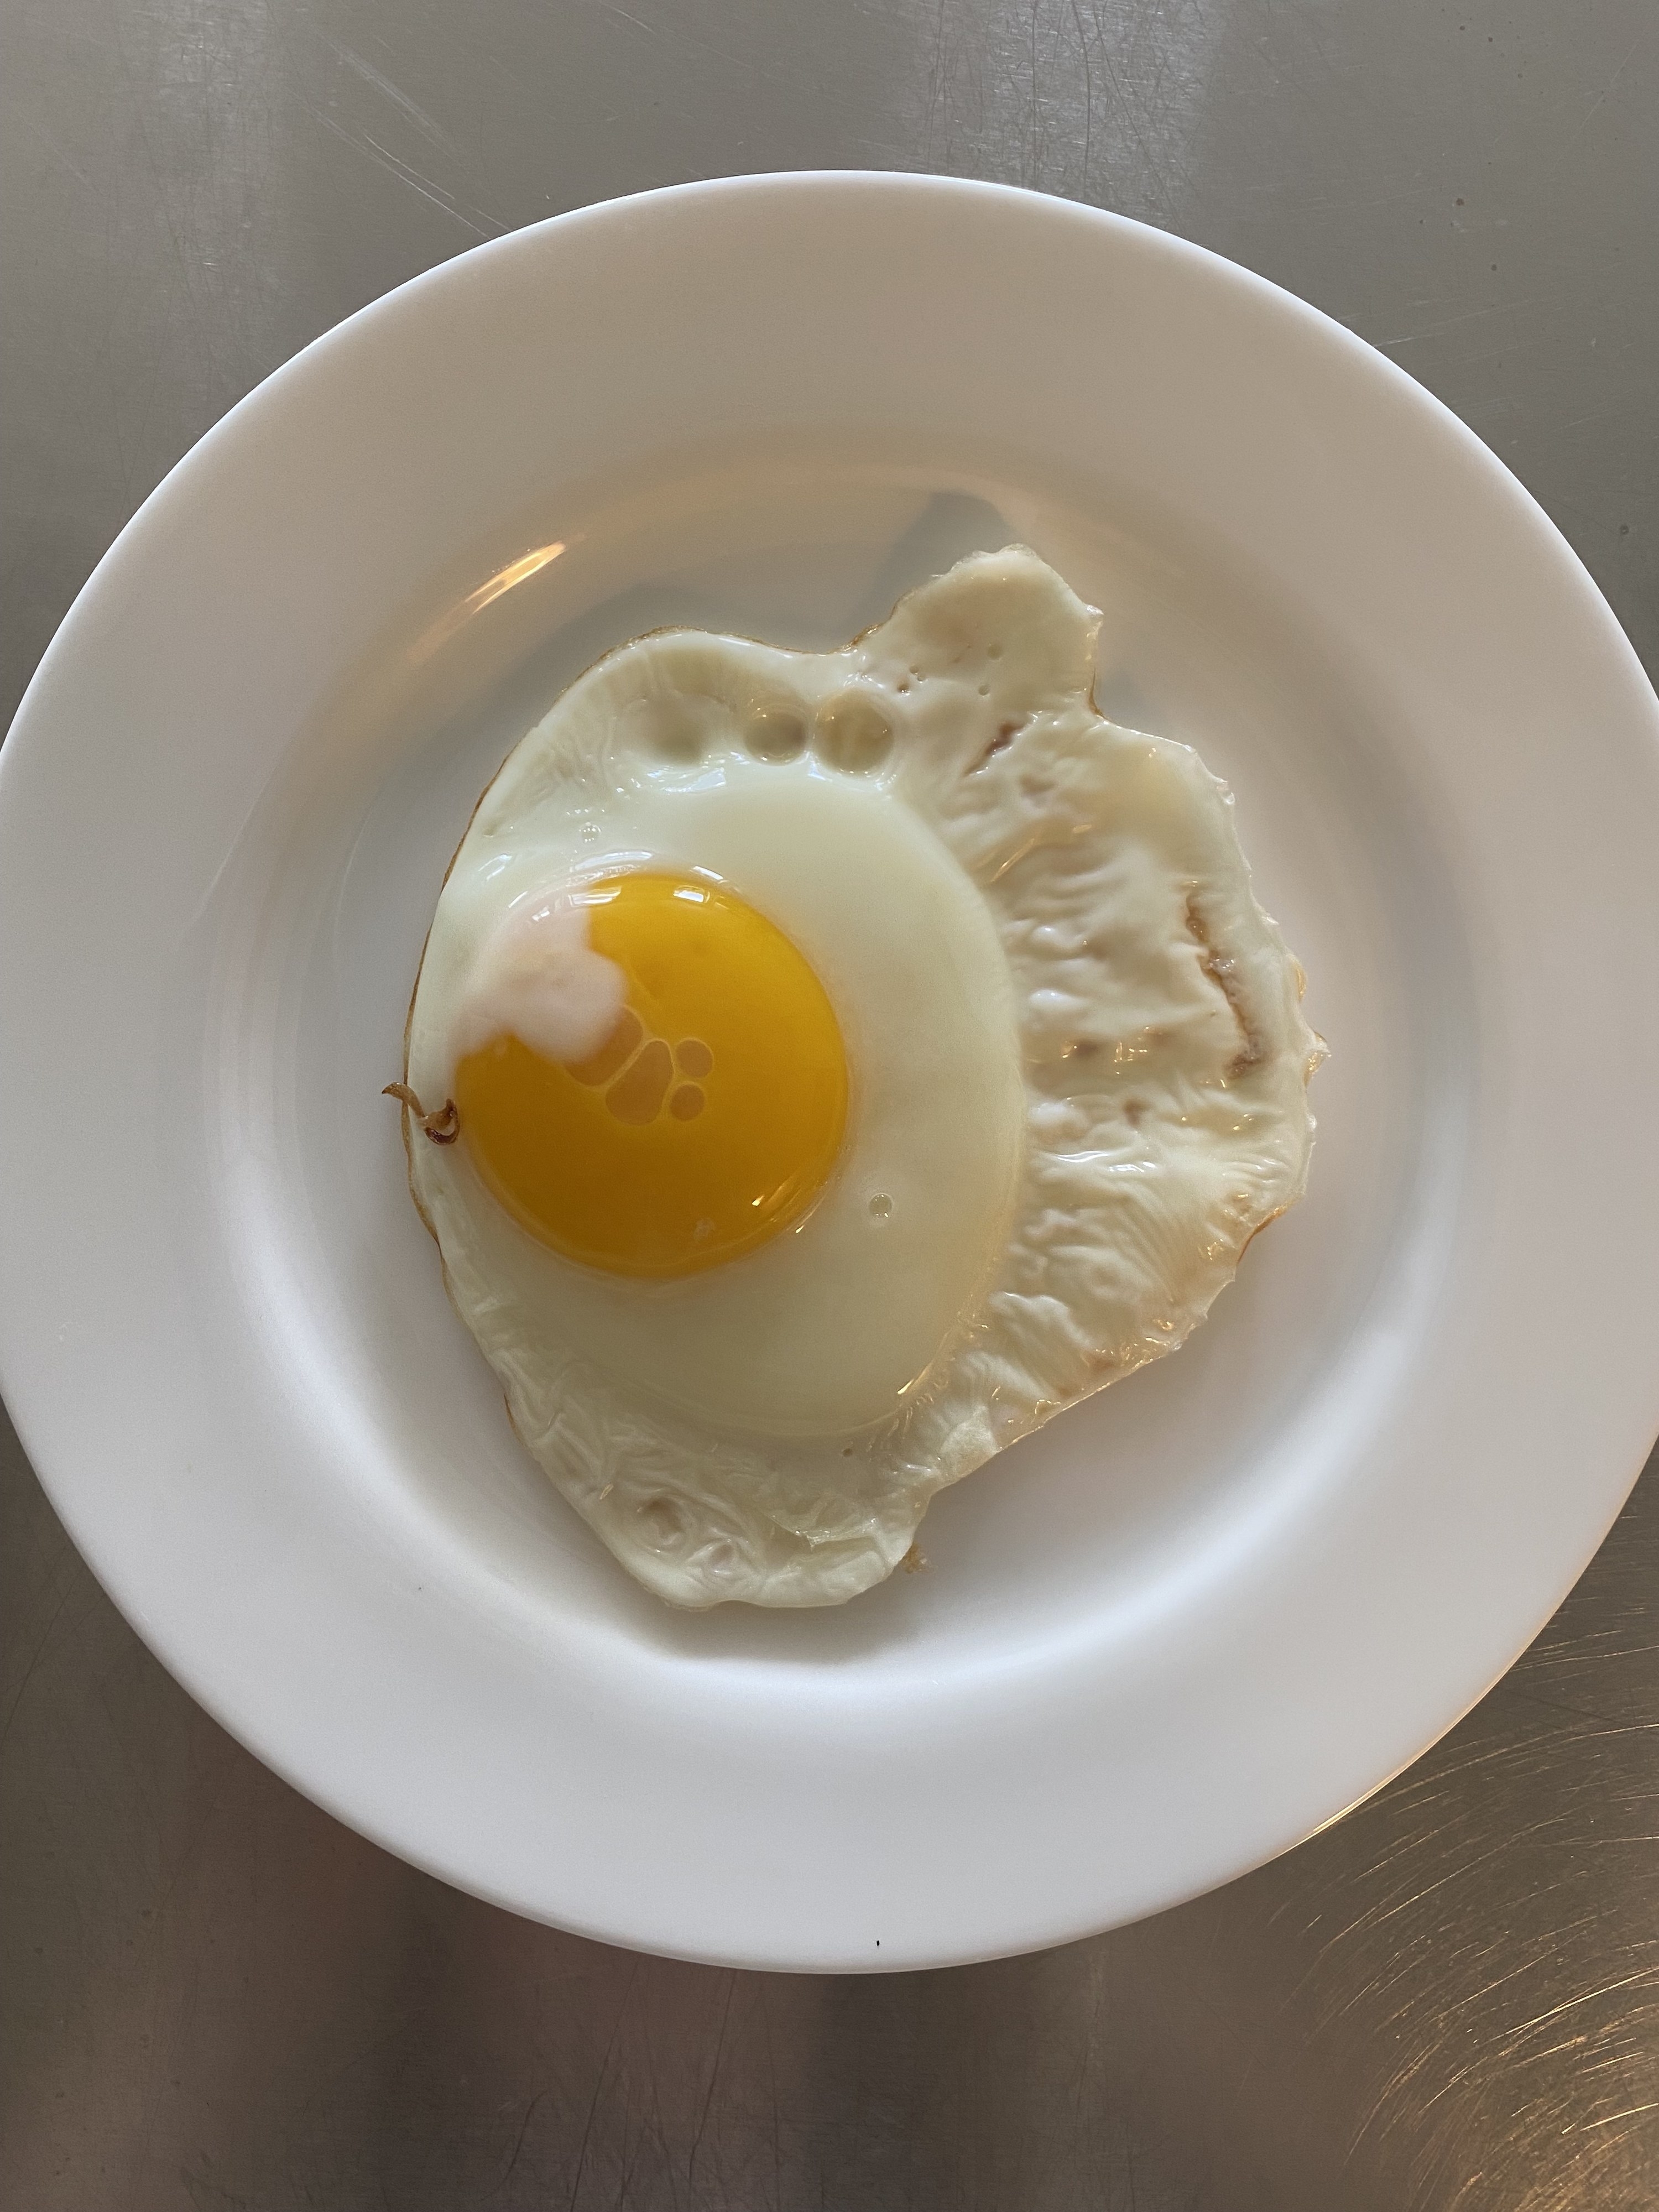 the final product of the sunny side up egg